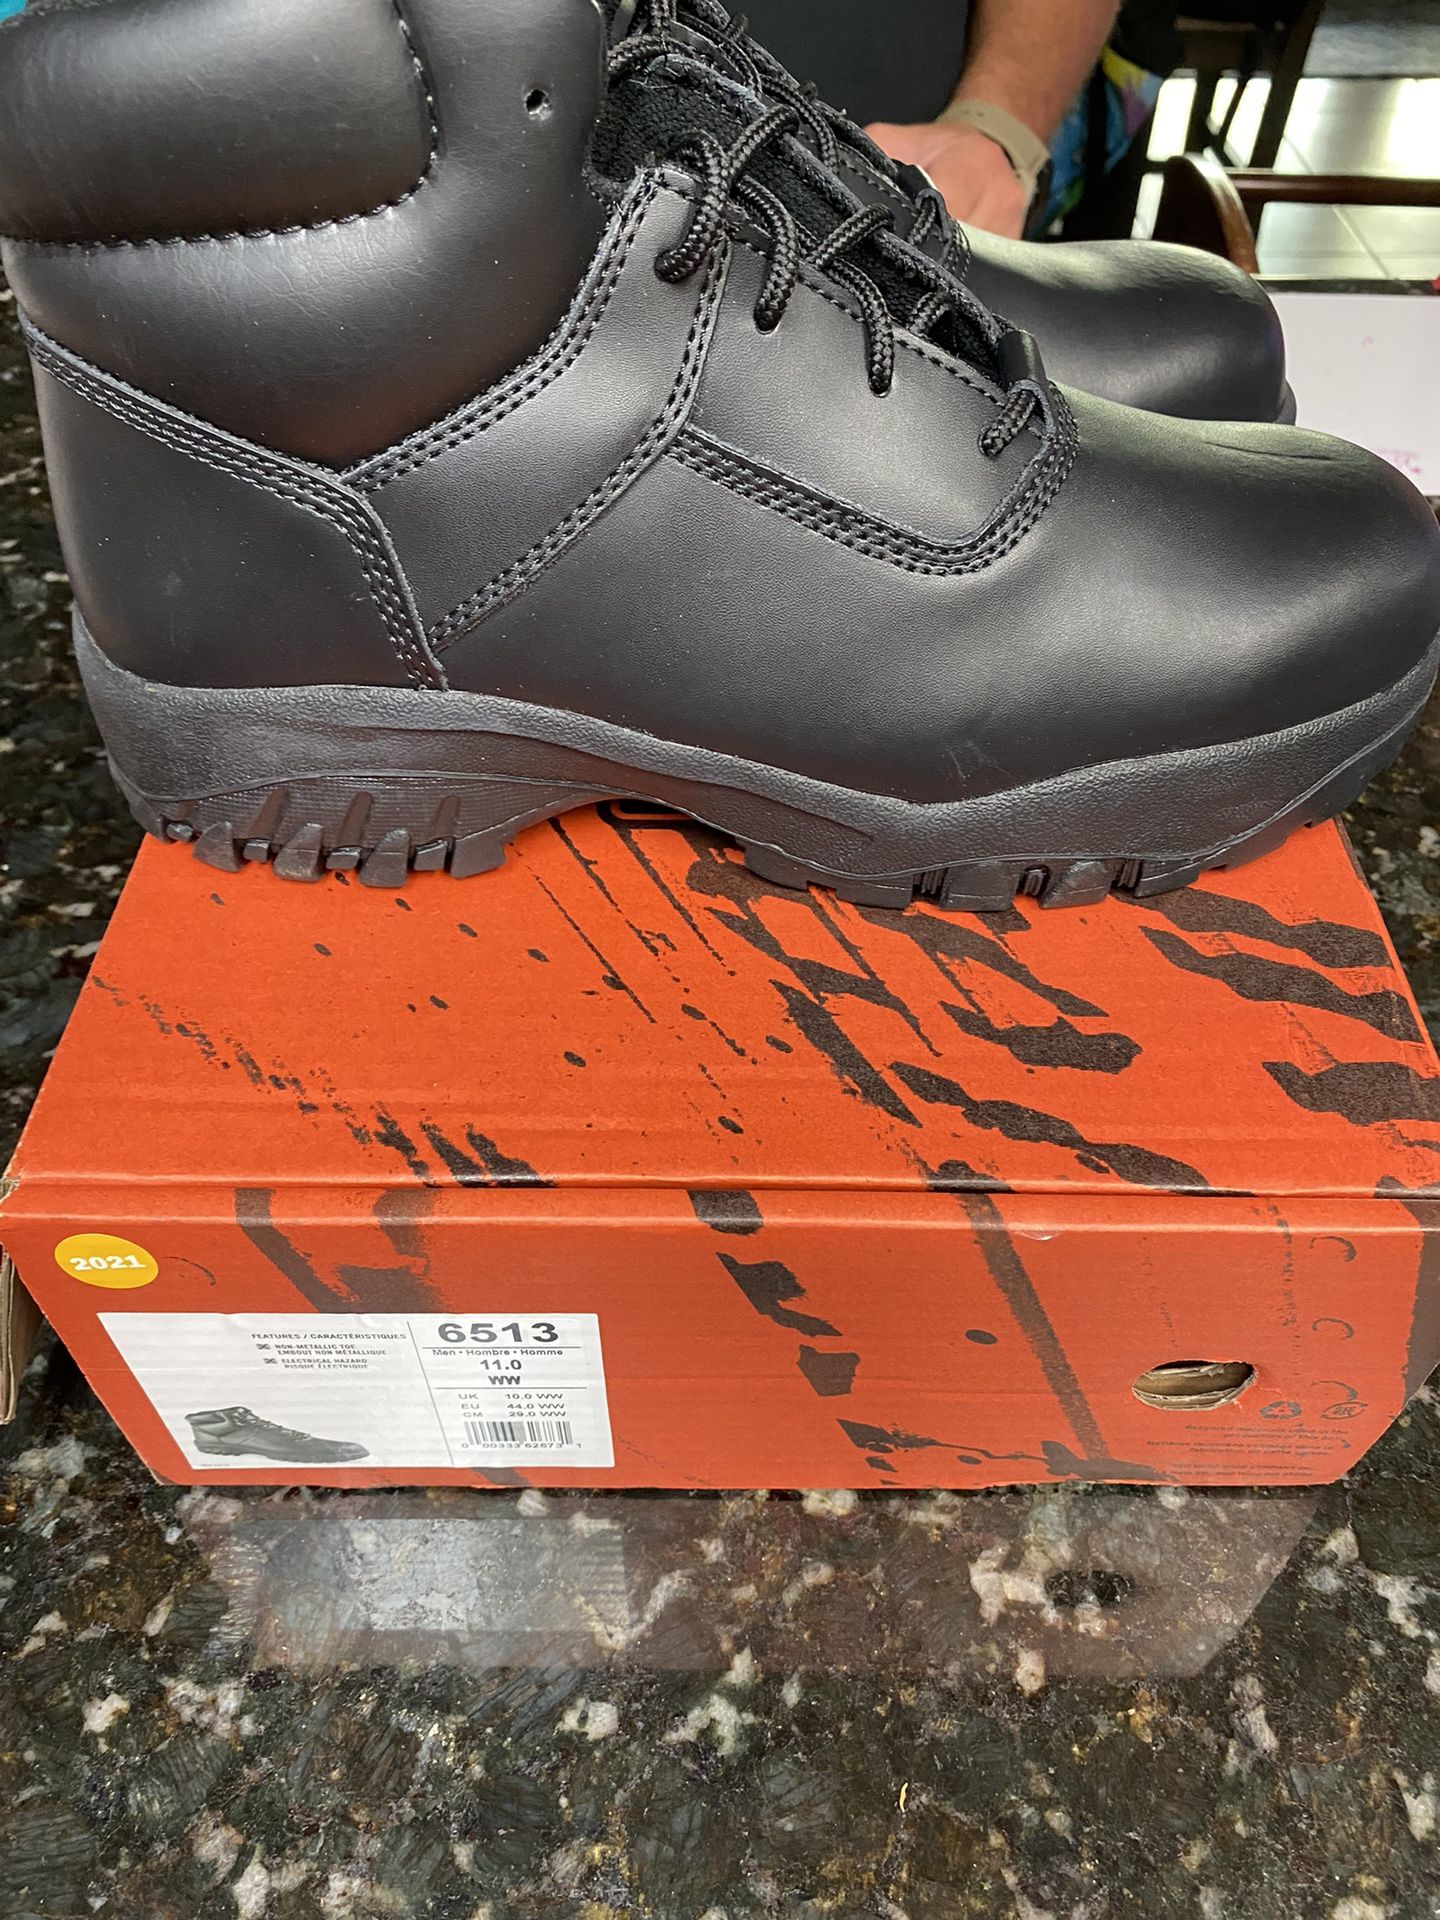 Men’s Size 11 Work Boots 